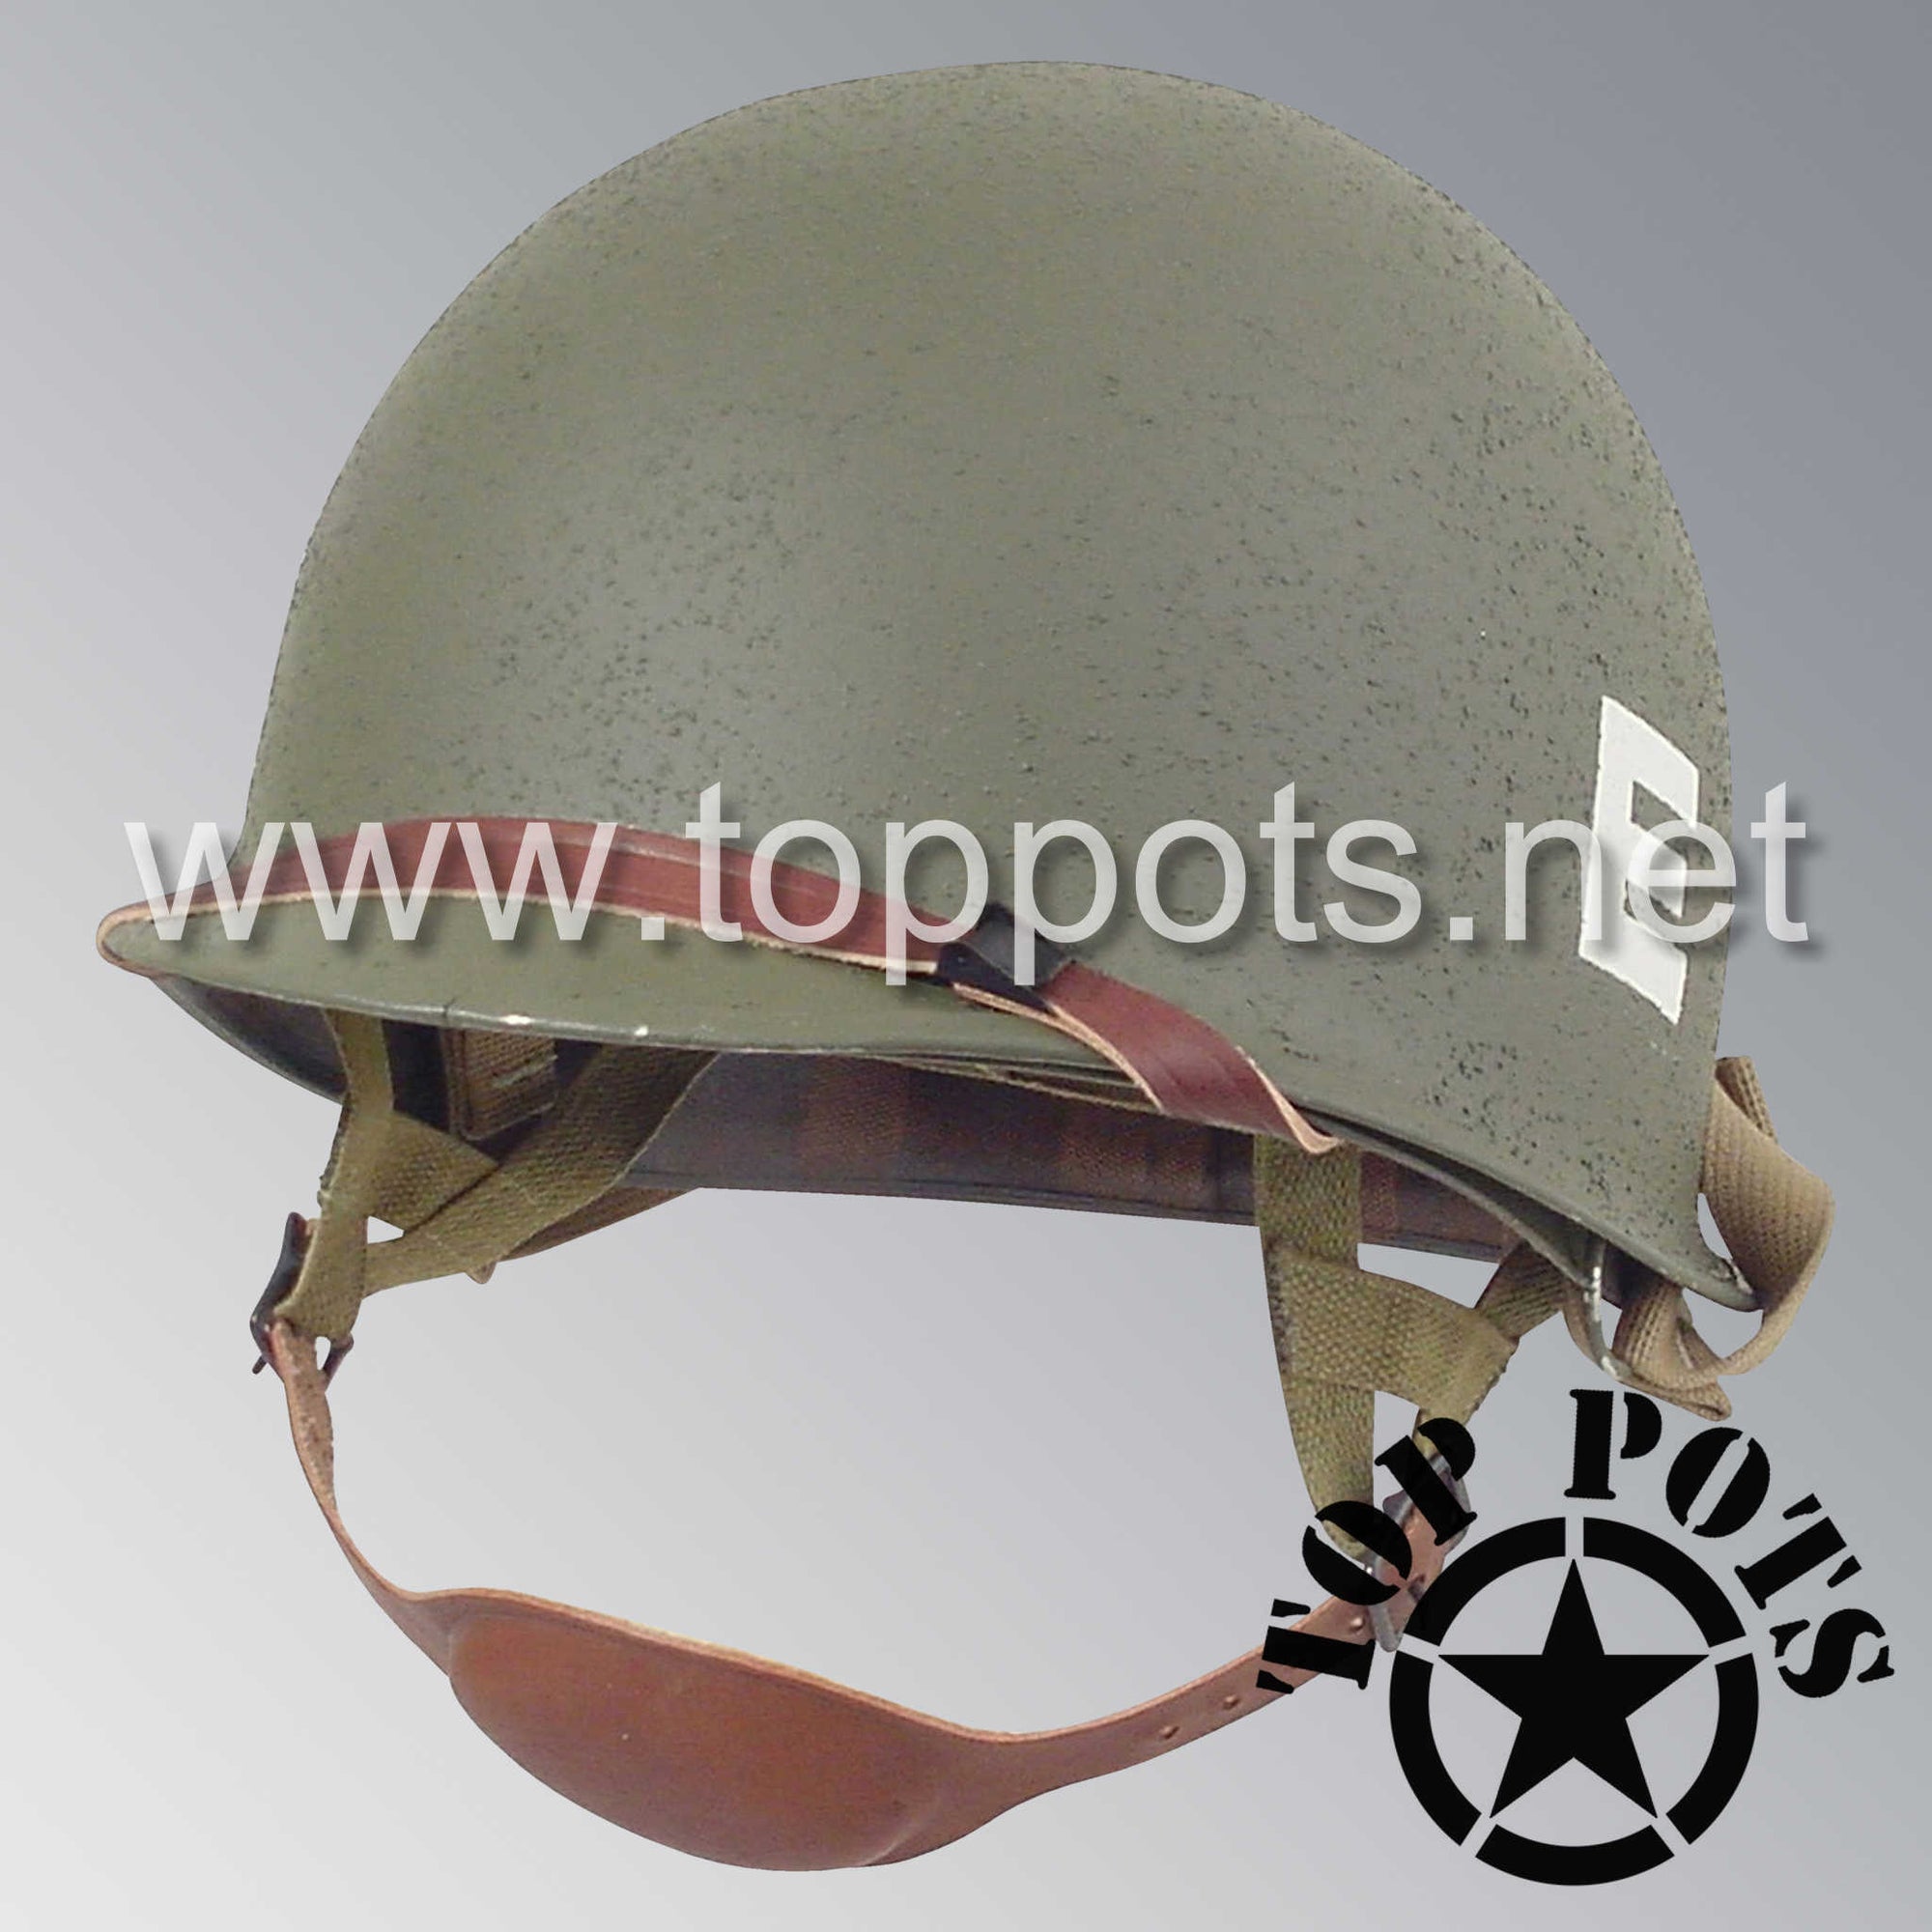 WWII US Army Restored Original M2 Paratrooper Airborne Helmet D Bale Shell and Liner with 101st Airborne 326th Engineer AEB Emblem